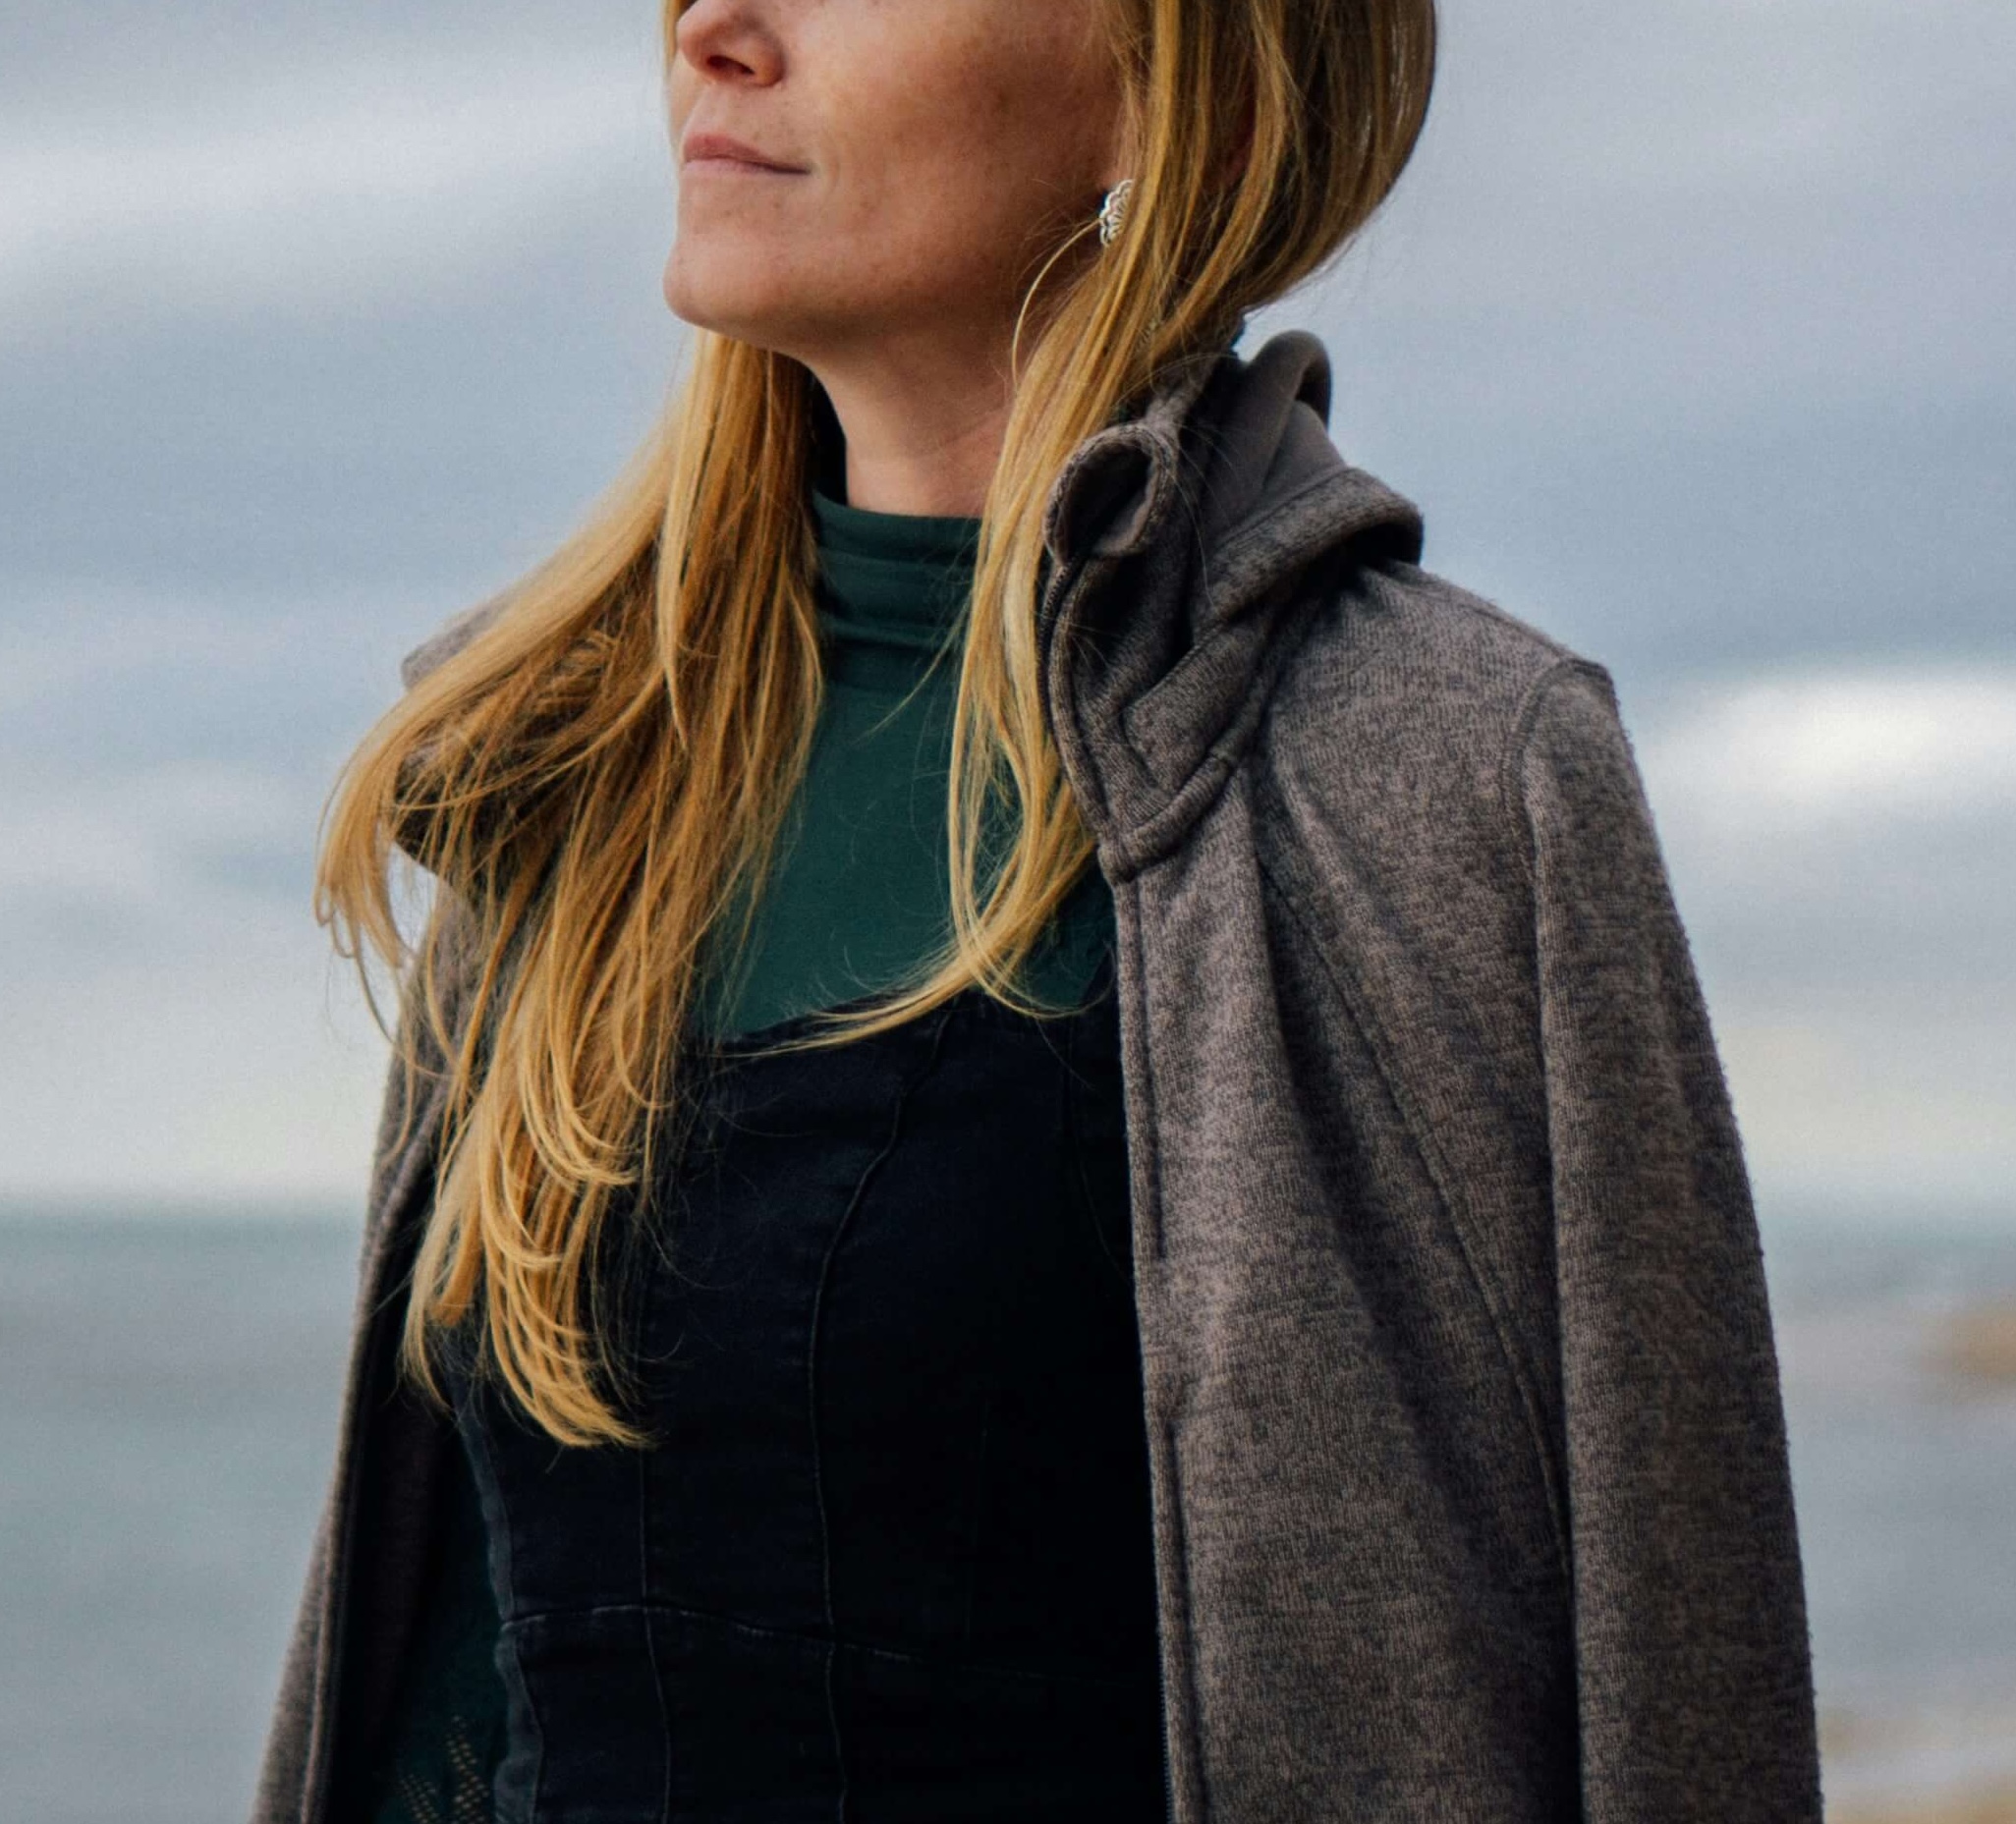 Image of a thoughtful woman standing on a beach looking out at the ocean on a cloudy day. Discover how therapy for introverts in Austin, TX can help you thrive with your unique traits.